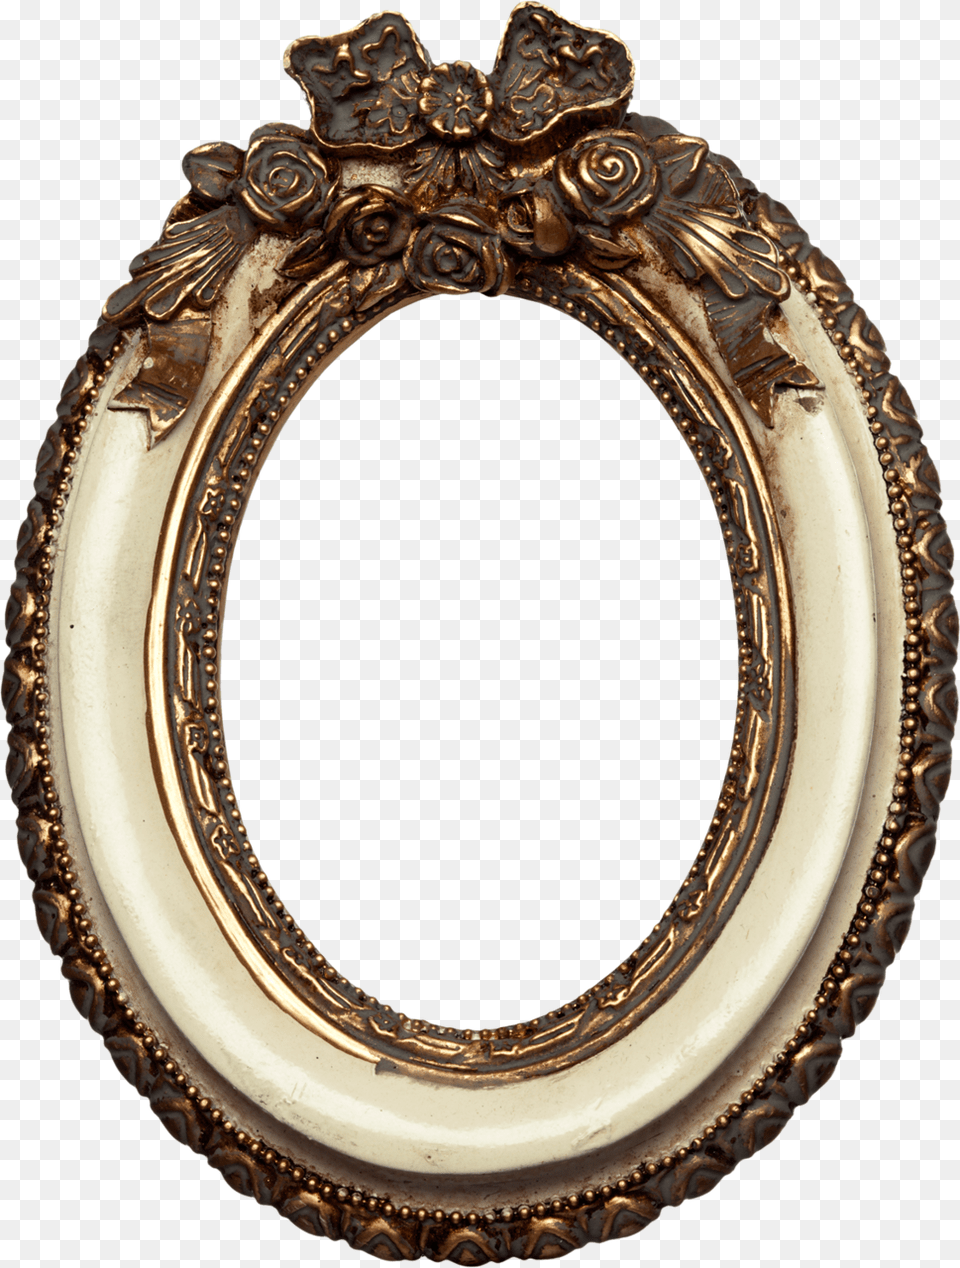 Printable Frames Oval Frame Oval Picture Frames Marcos Antiguos Ovalados, Photography, Plate, Bronze Png Image